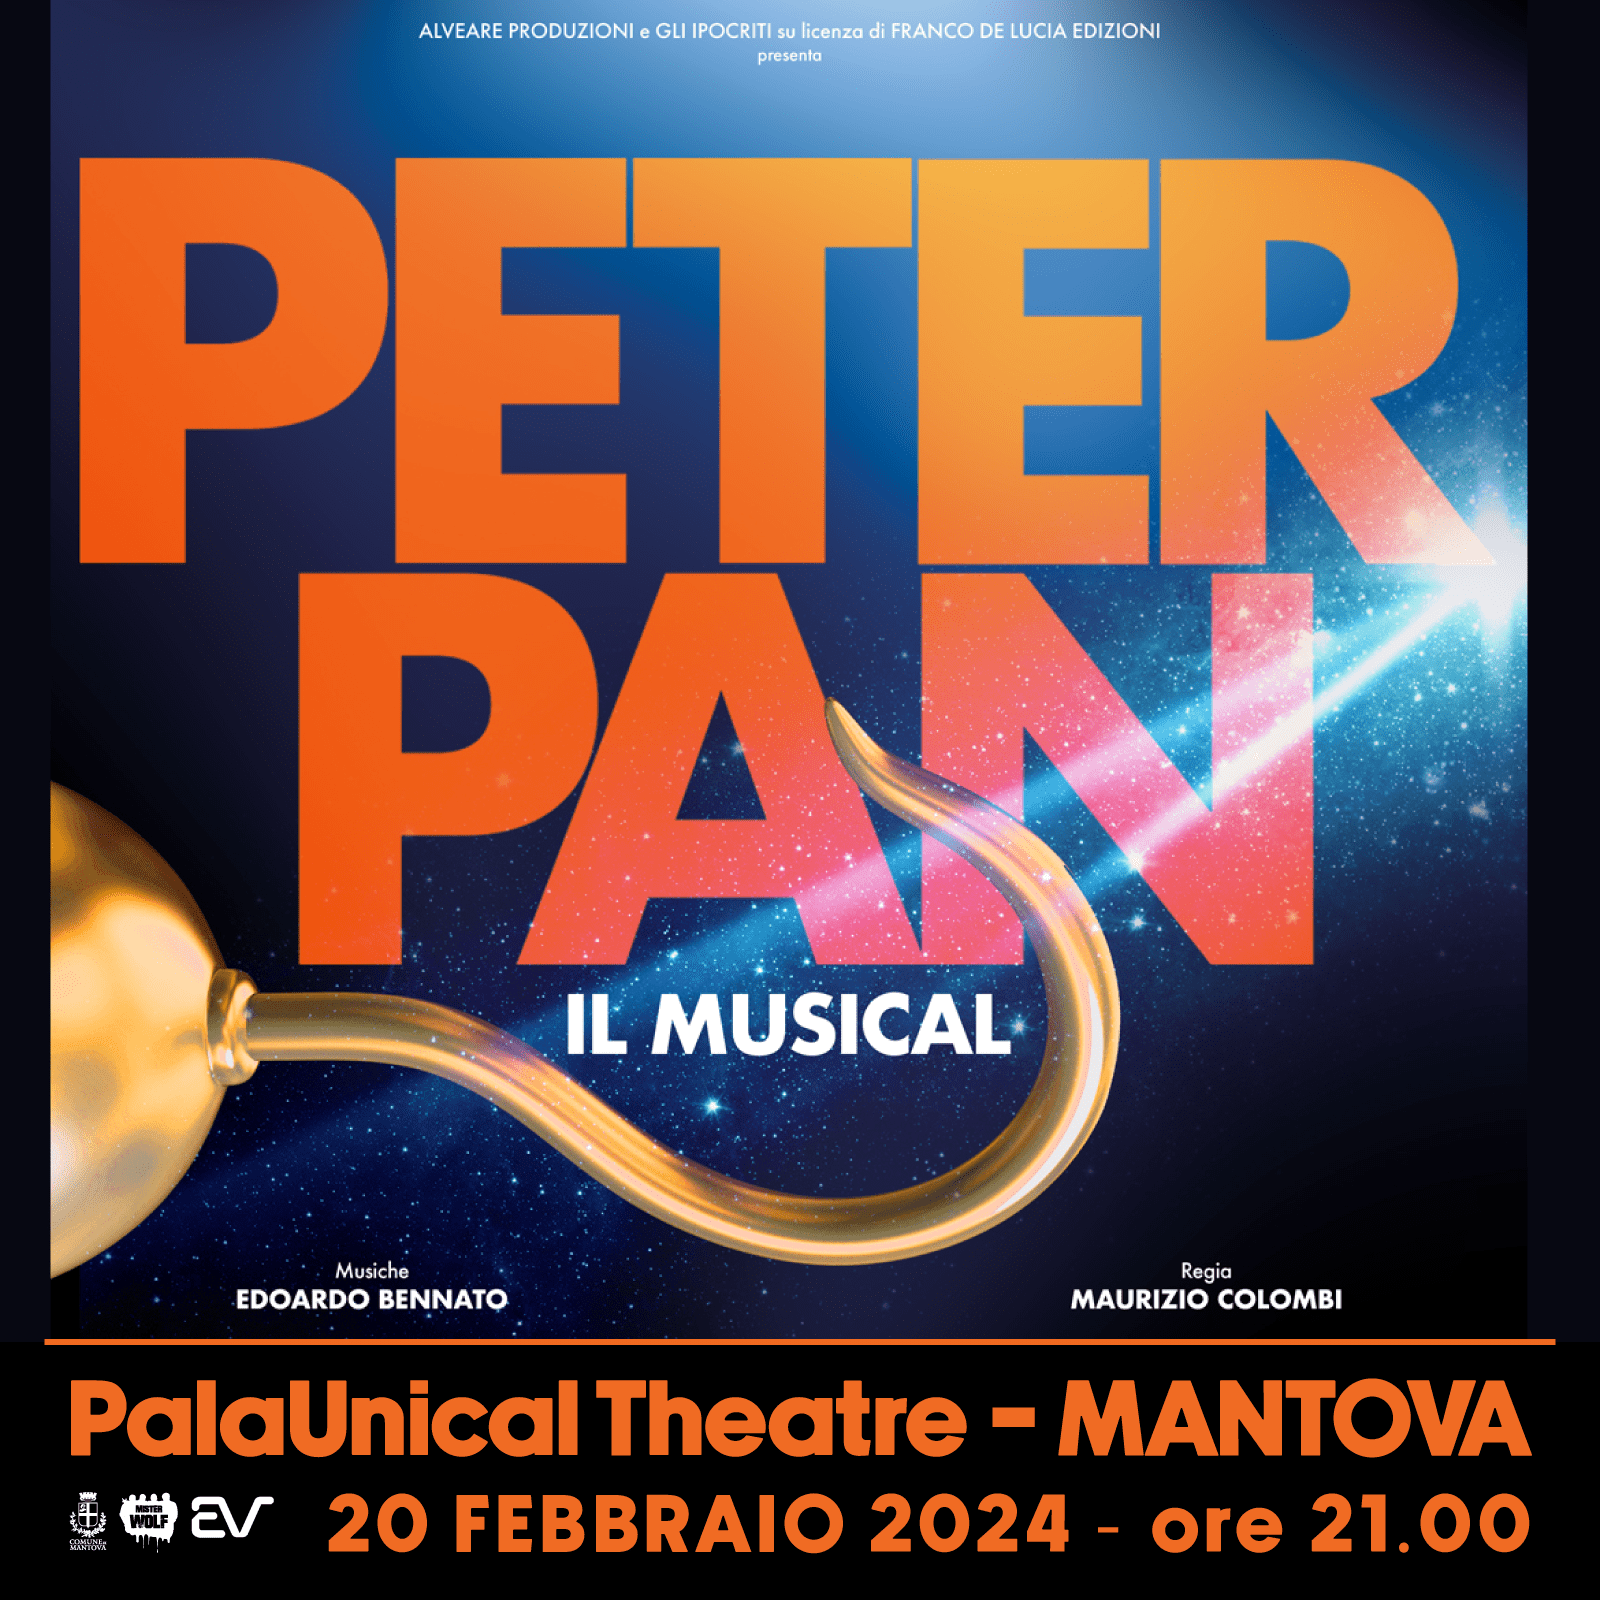 Peter Pan - Il musical